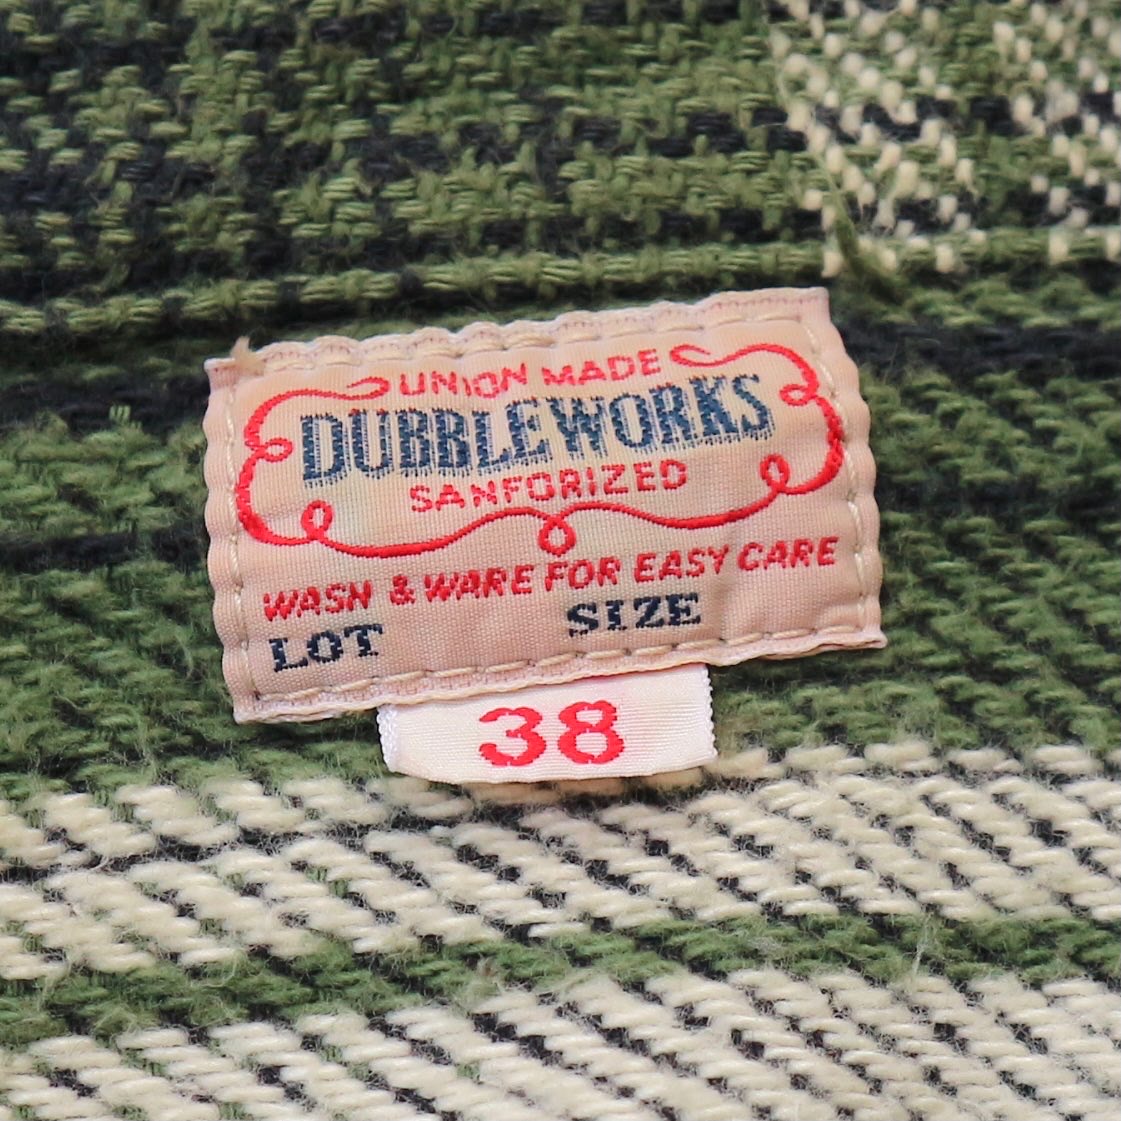 Dubble Works by Warehouse Size S